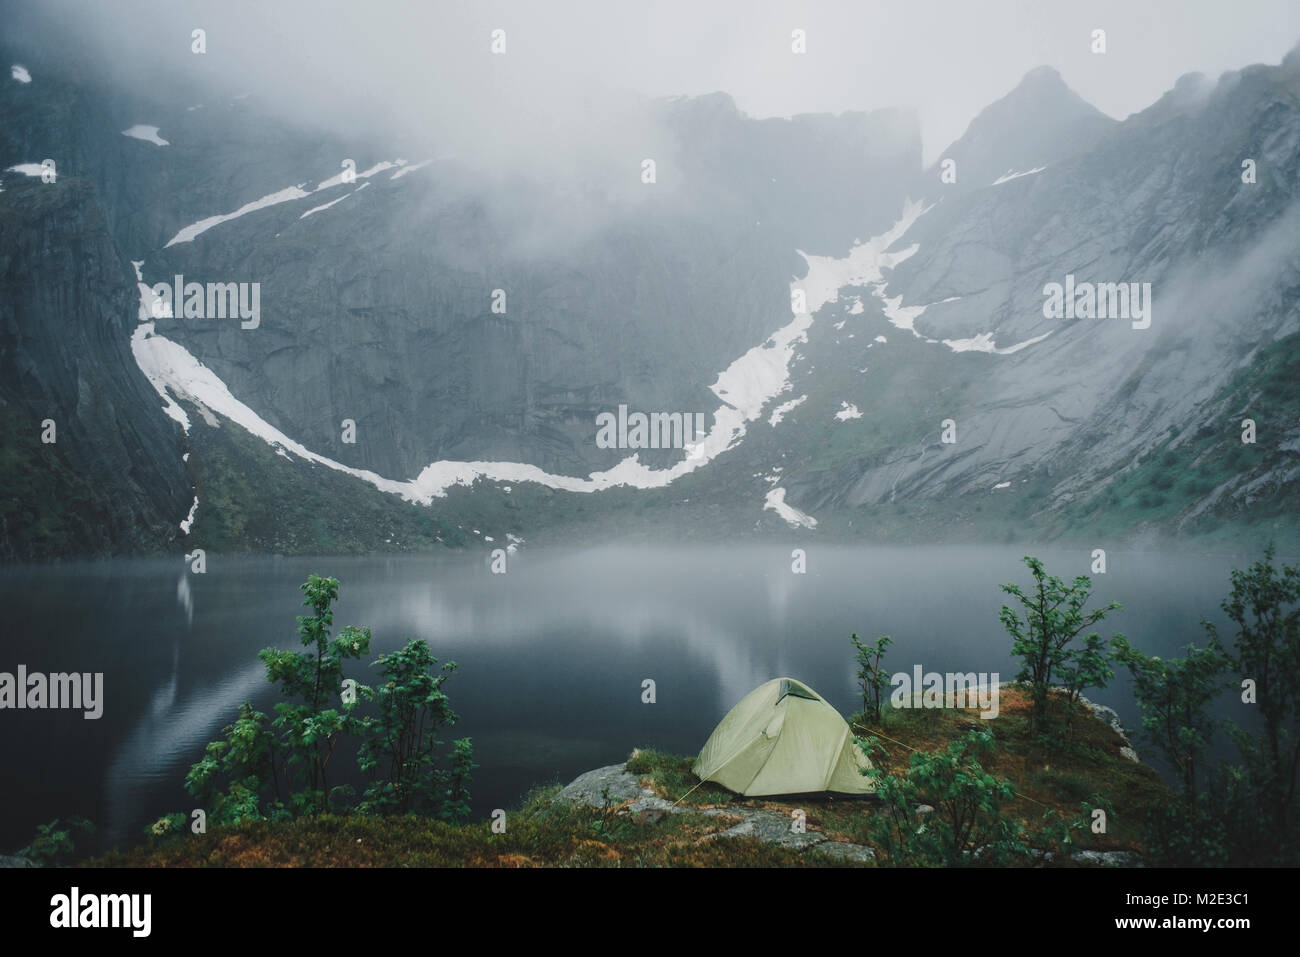 Camping tent near river in fog Stock Photo